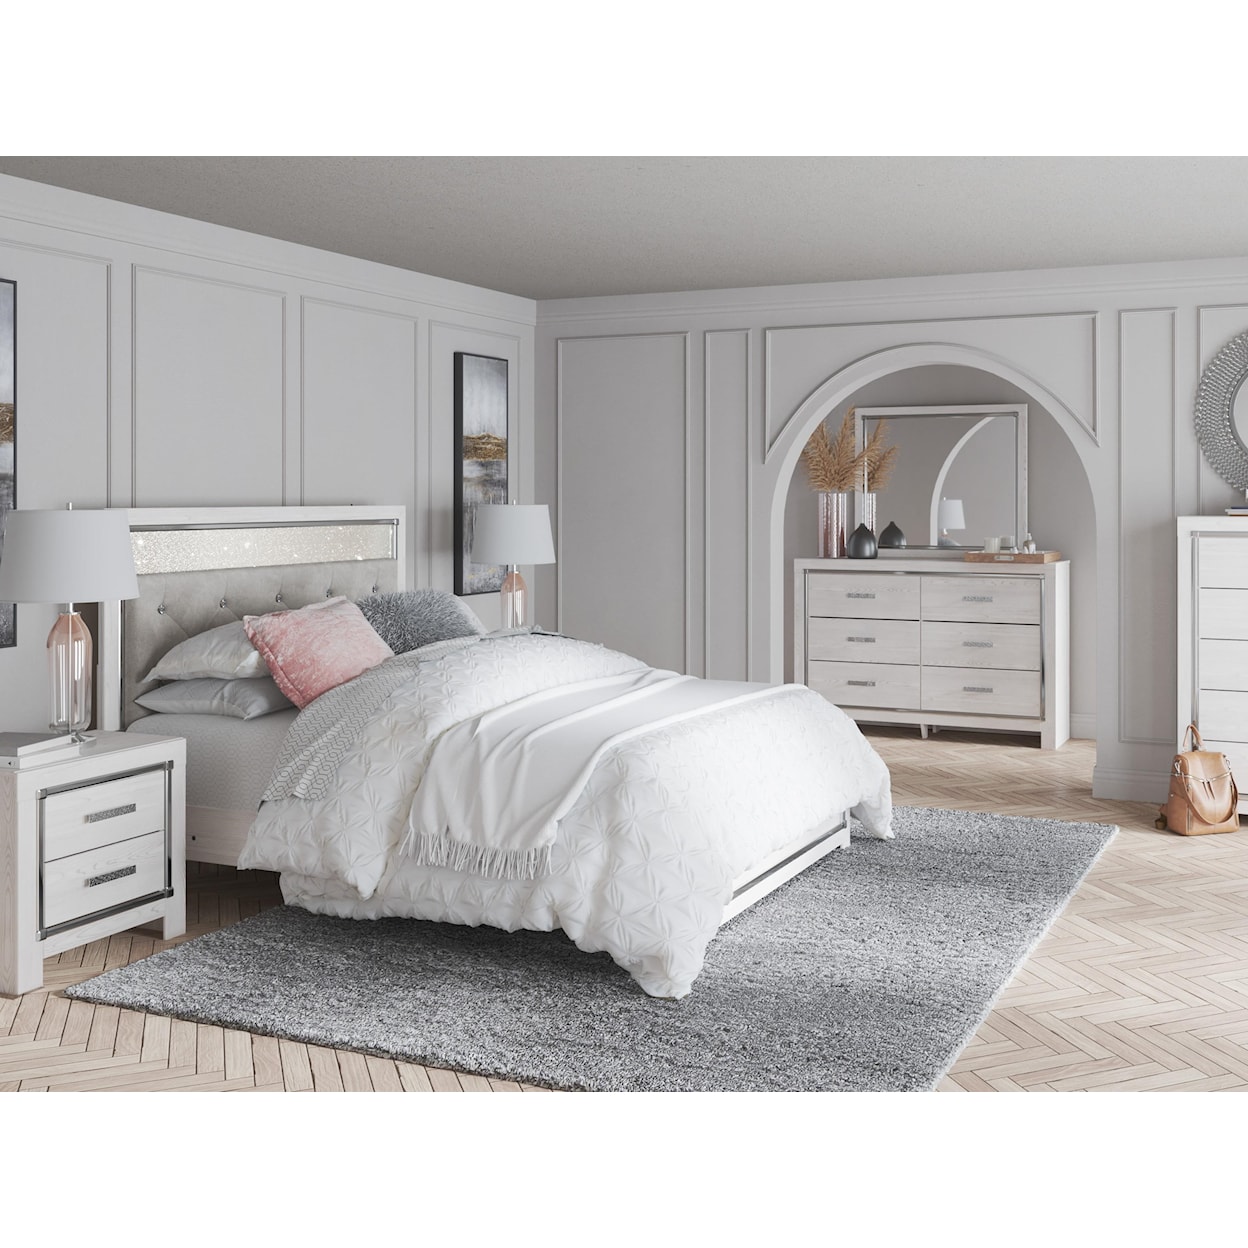 Signature Design by Ashley Altyra Queen 5 Pc Bedroom Group